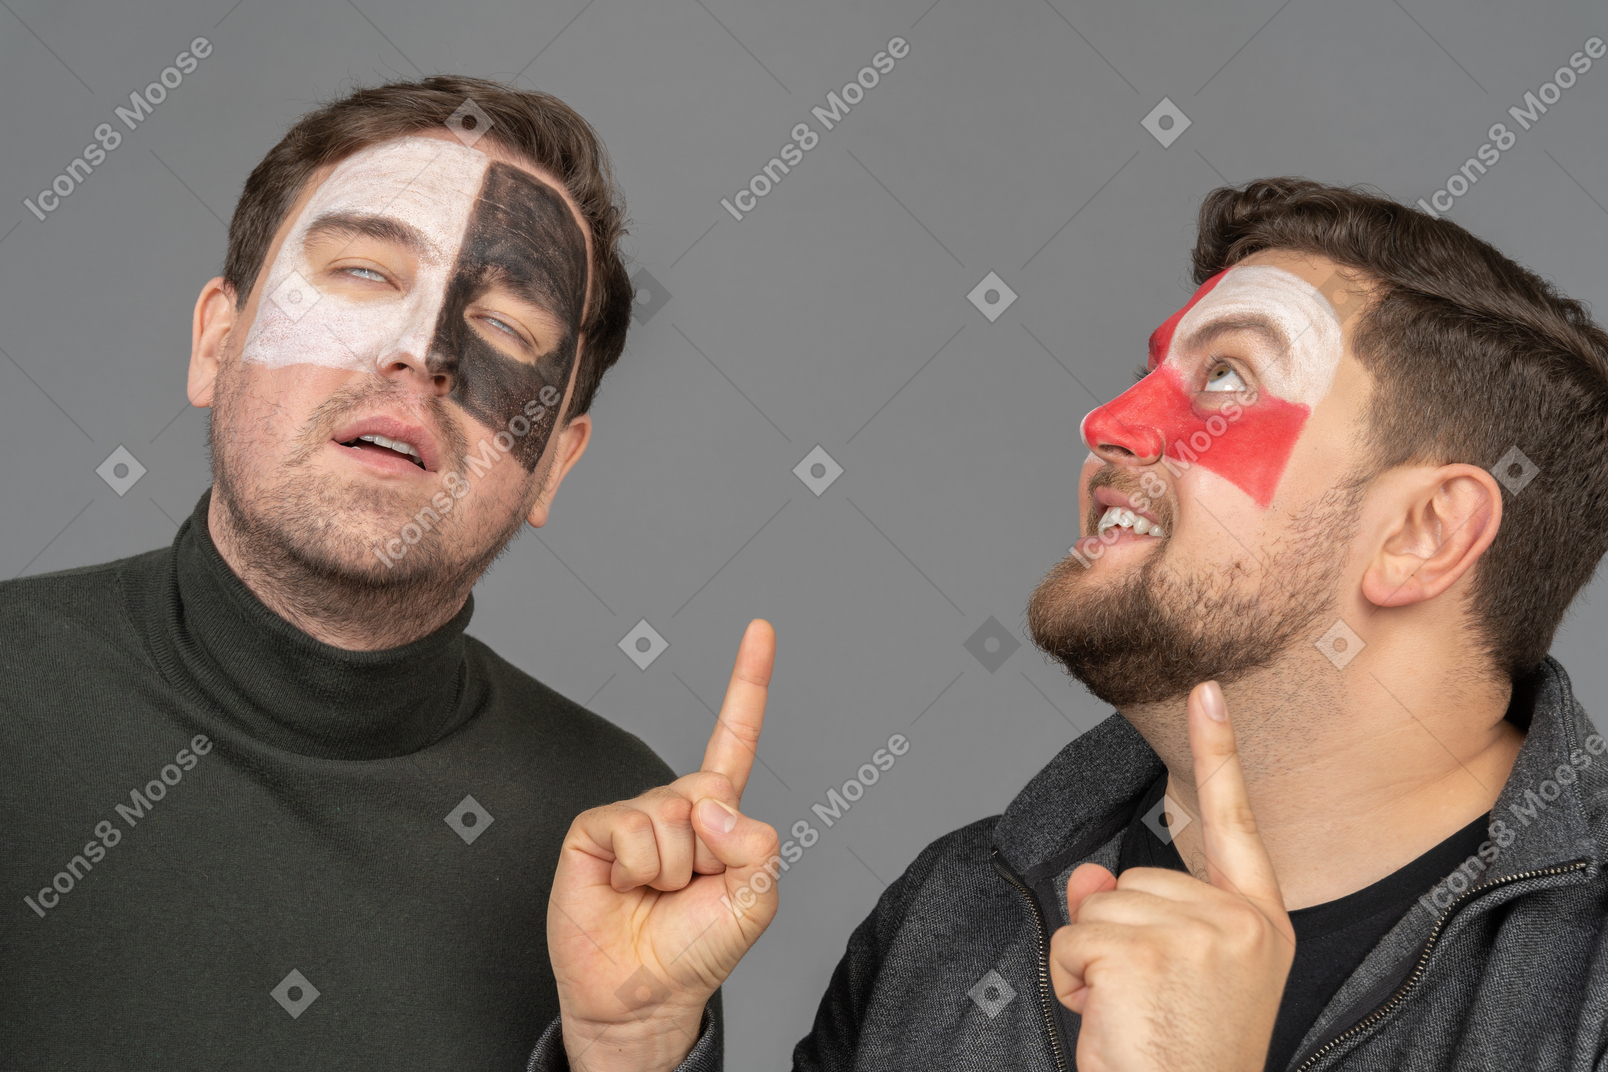 Front view of two male football fans pointing fingers and rolling eyes